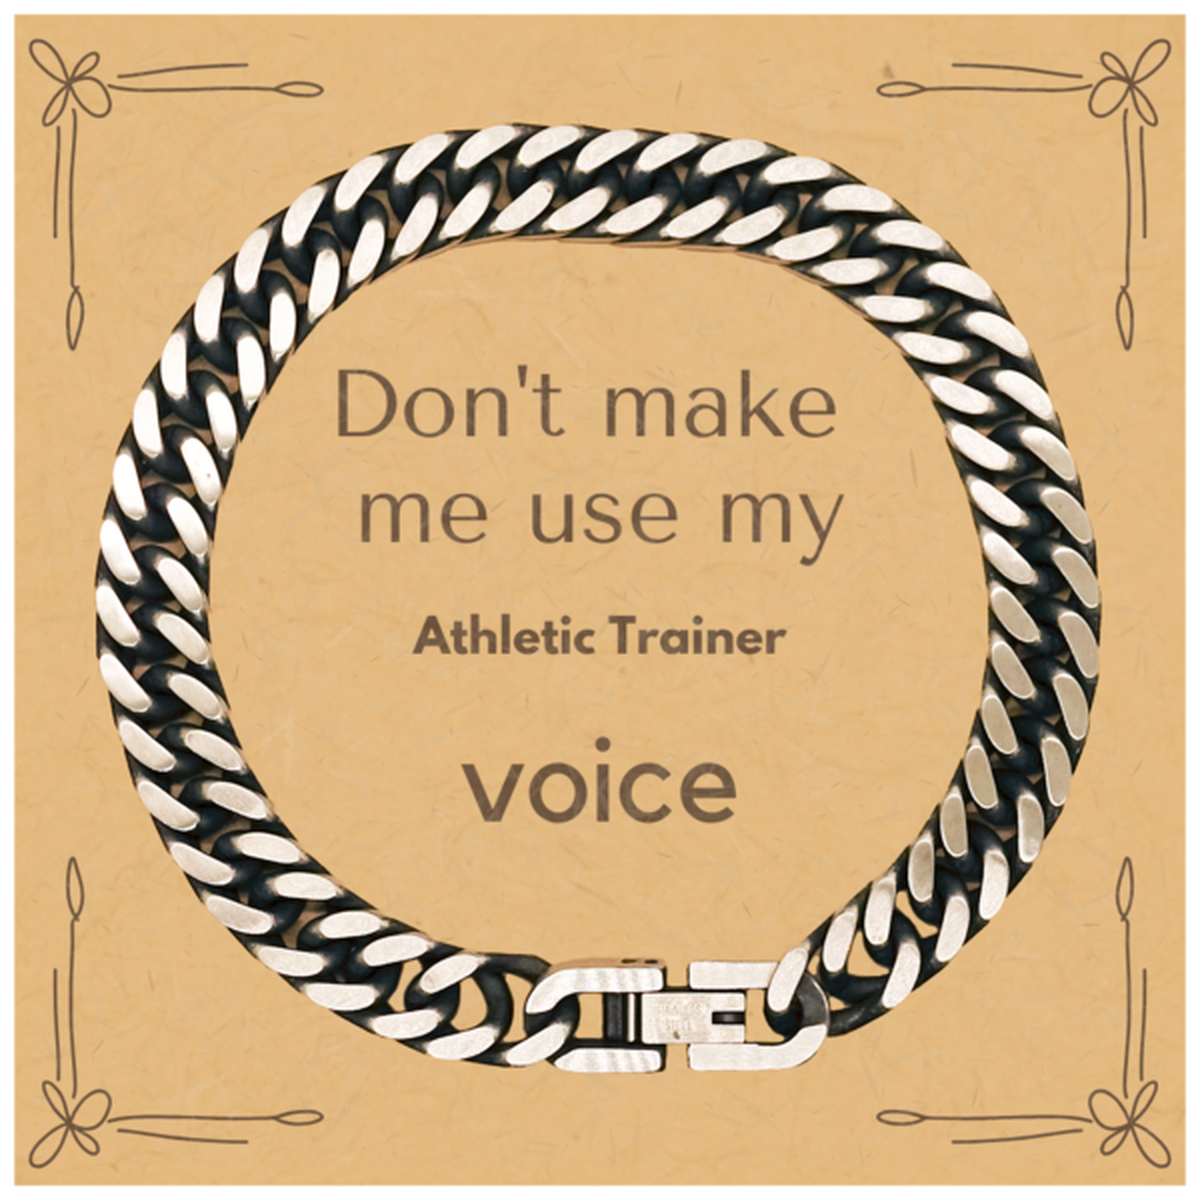 Don't make me use my Athletic Trainer voice, Sarcasm Athletic Trainer Card Gifts, Christmas Athletic Trainer Cuban Link Chain Bracelet Birthday Unique Gifts For Athletic Trainer Coworkers, Men, Women, Colleague, Friends